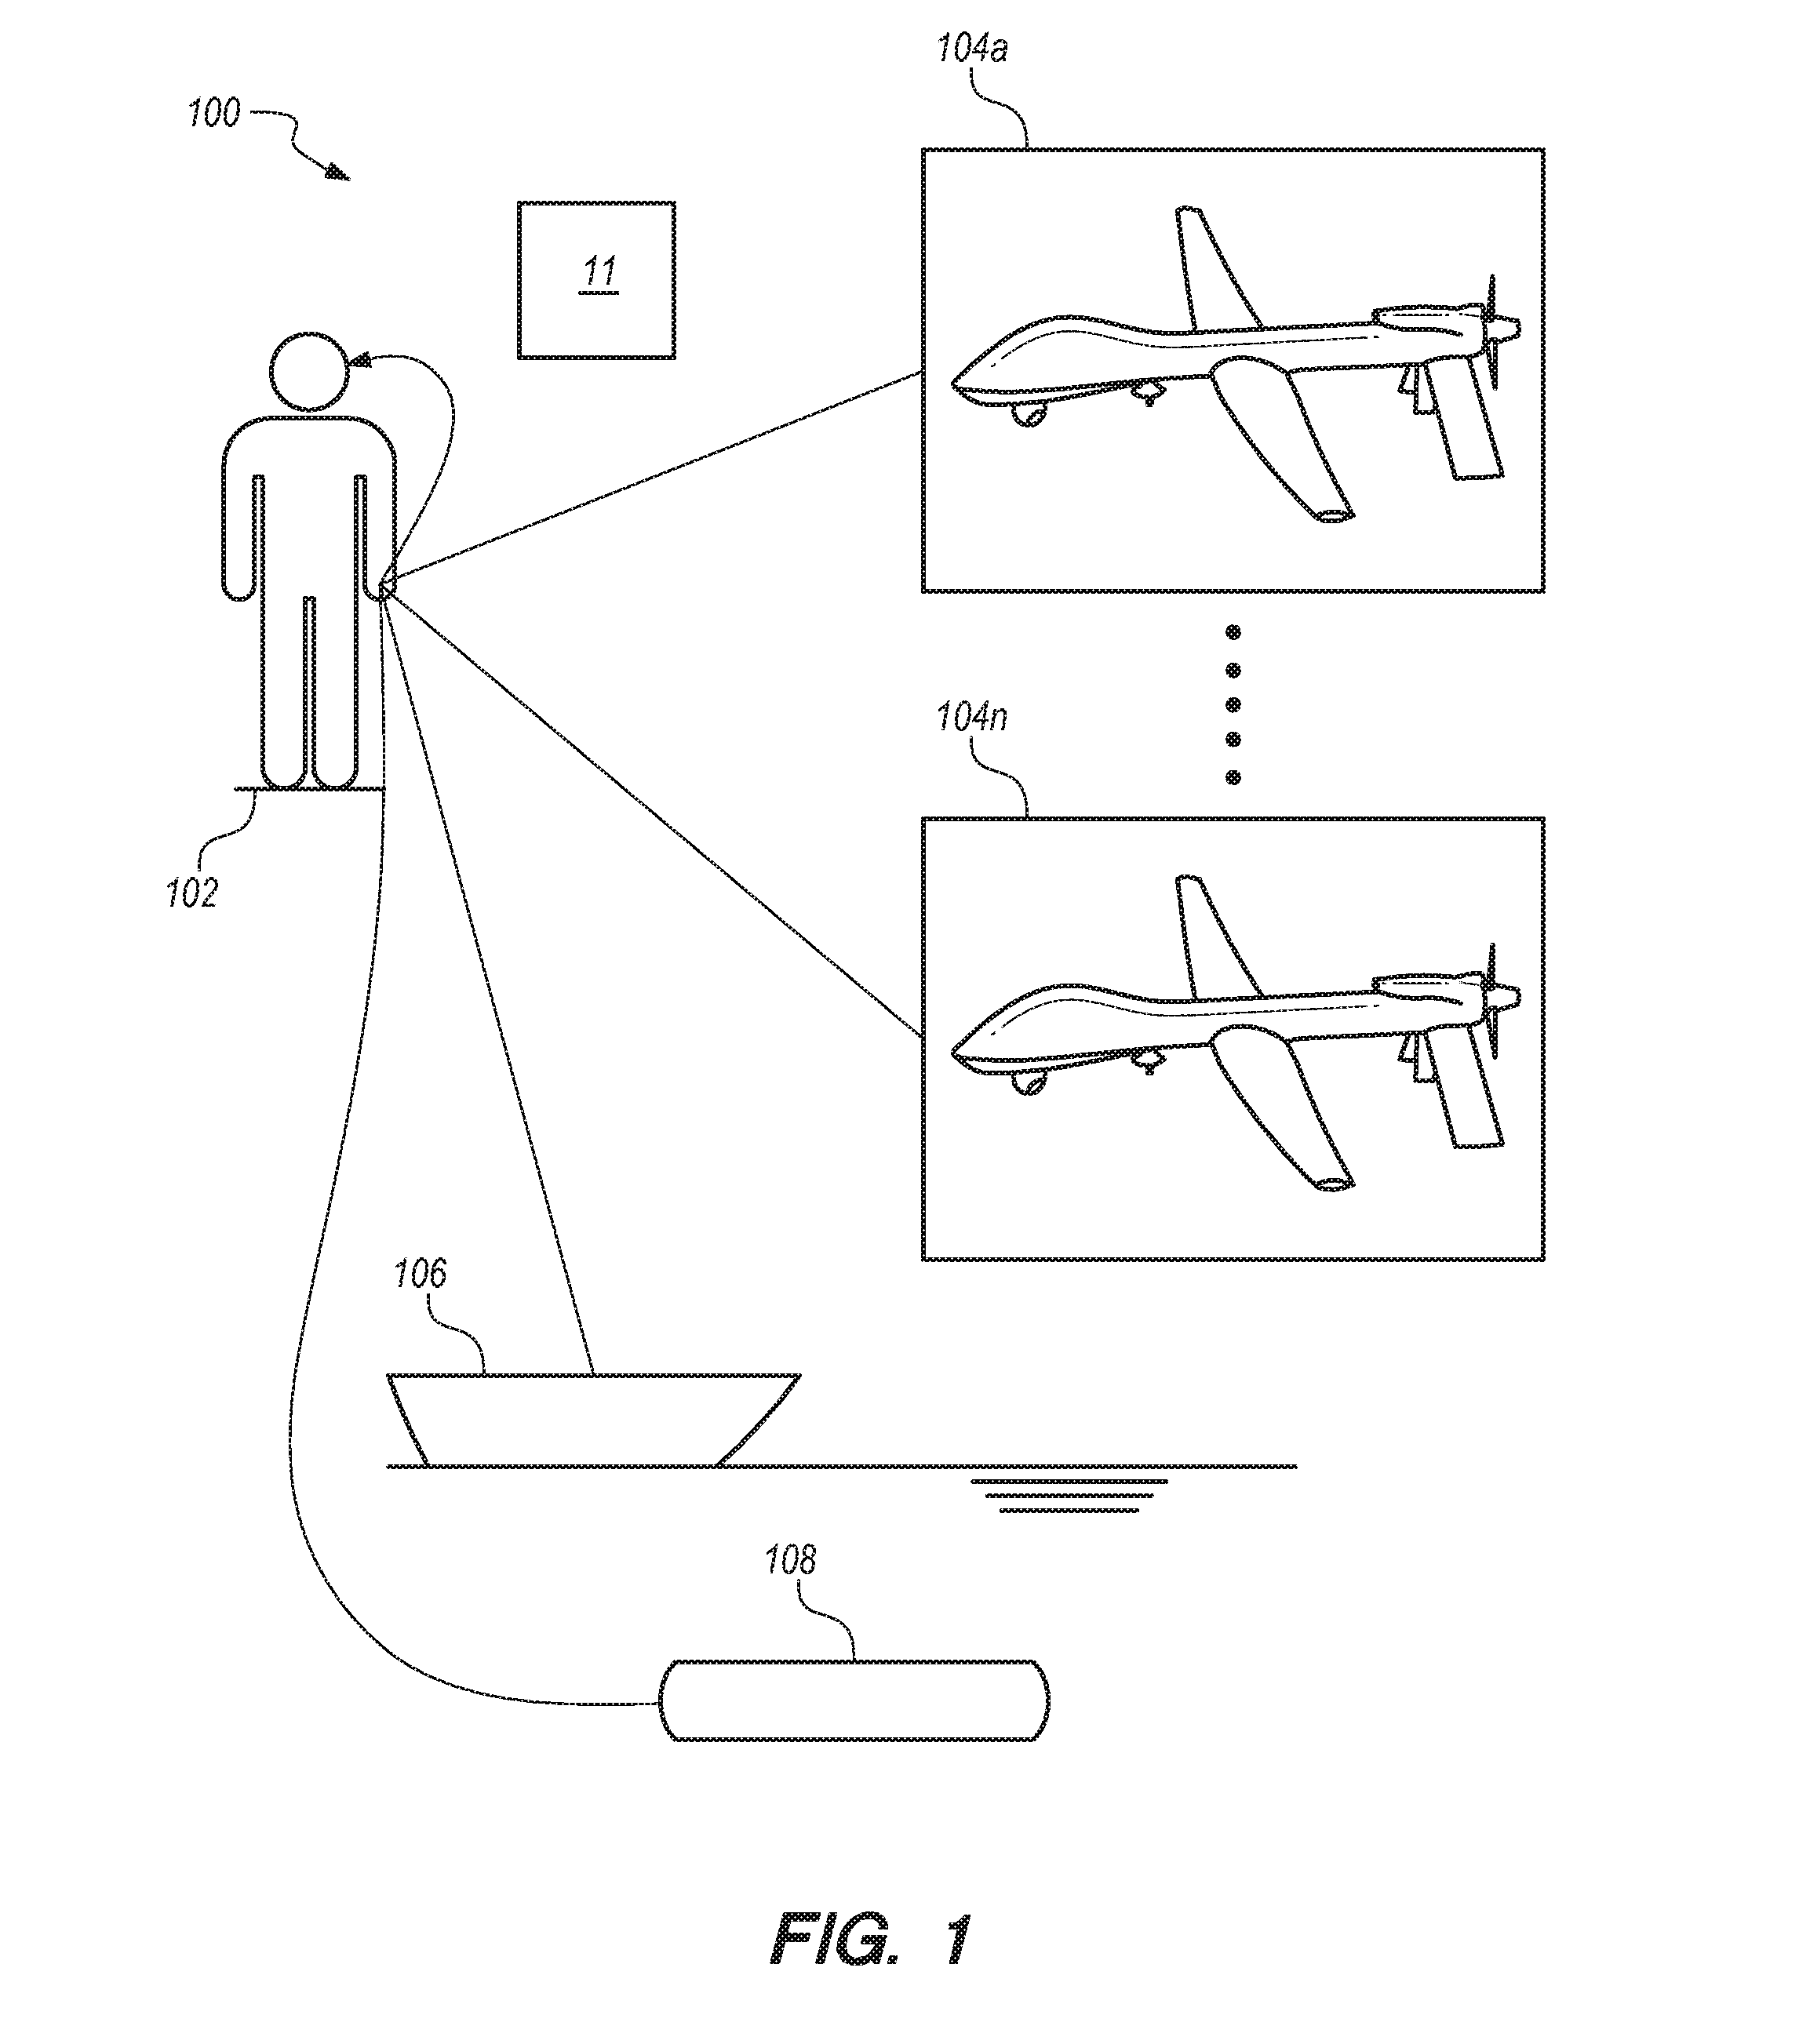 System and Method for Predicting An Adequate Ratio of Unmanned Vehicles to Operators